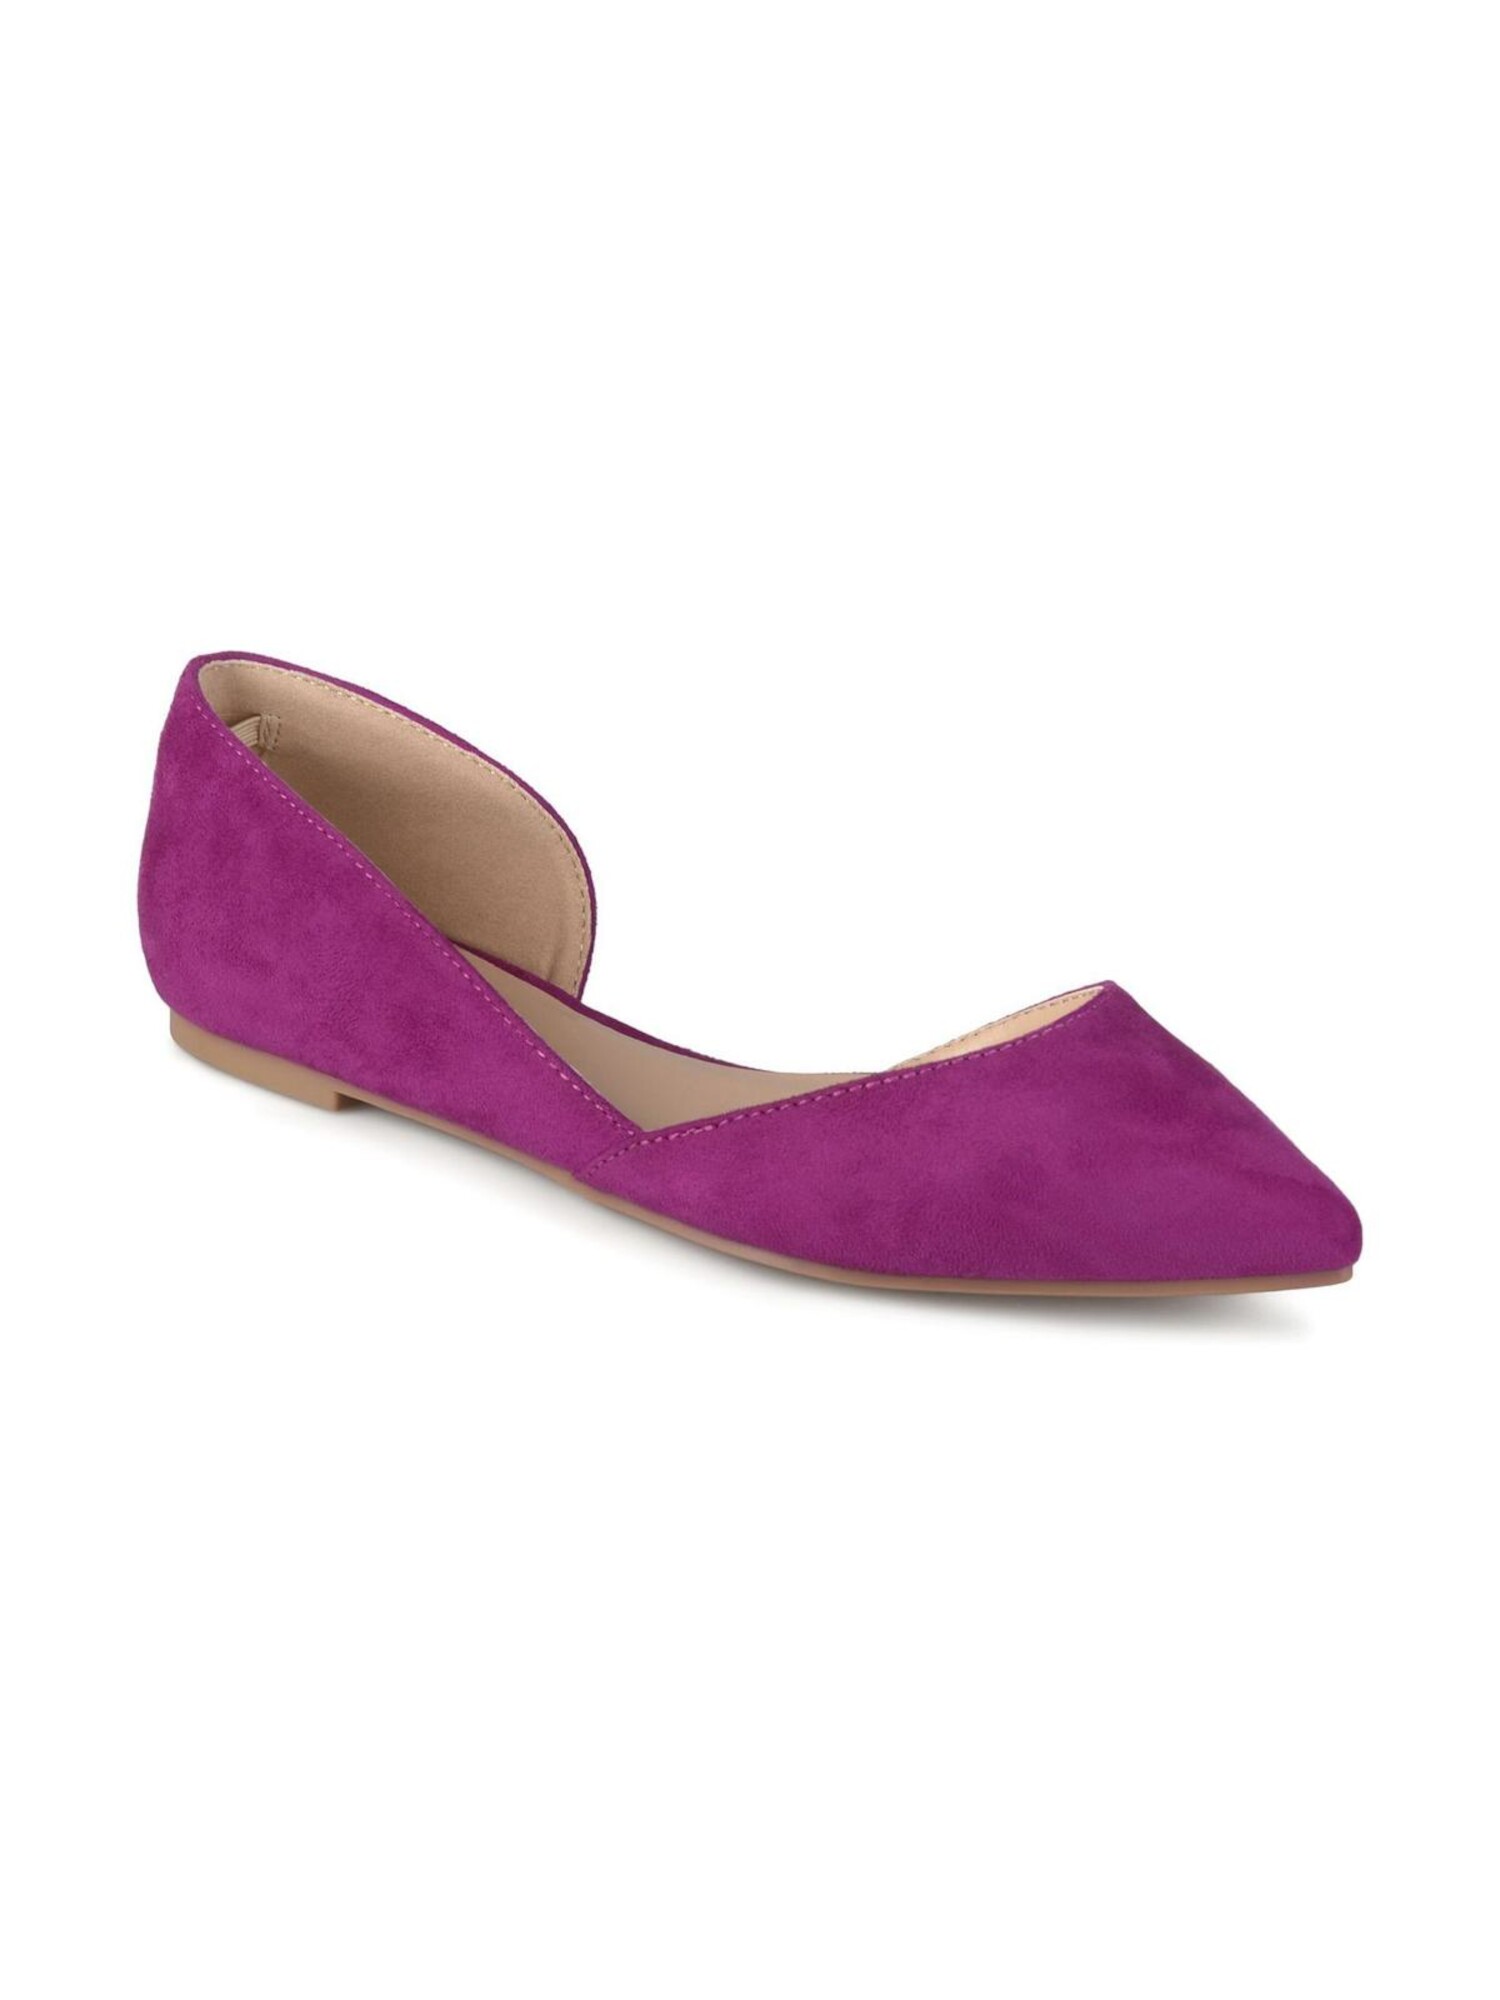 JOURNEE COLLECTION Womens Purple Dorsay Padded Ester Pointed Toe Slip On Ballet Flats 7.5 M